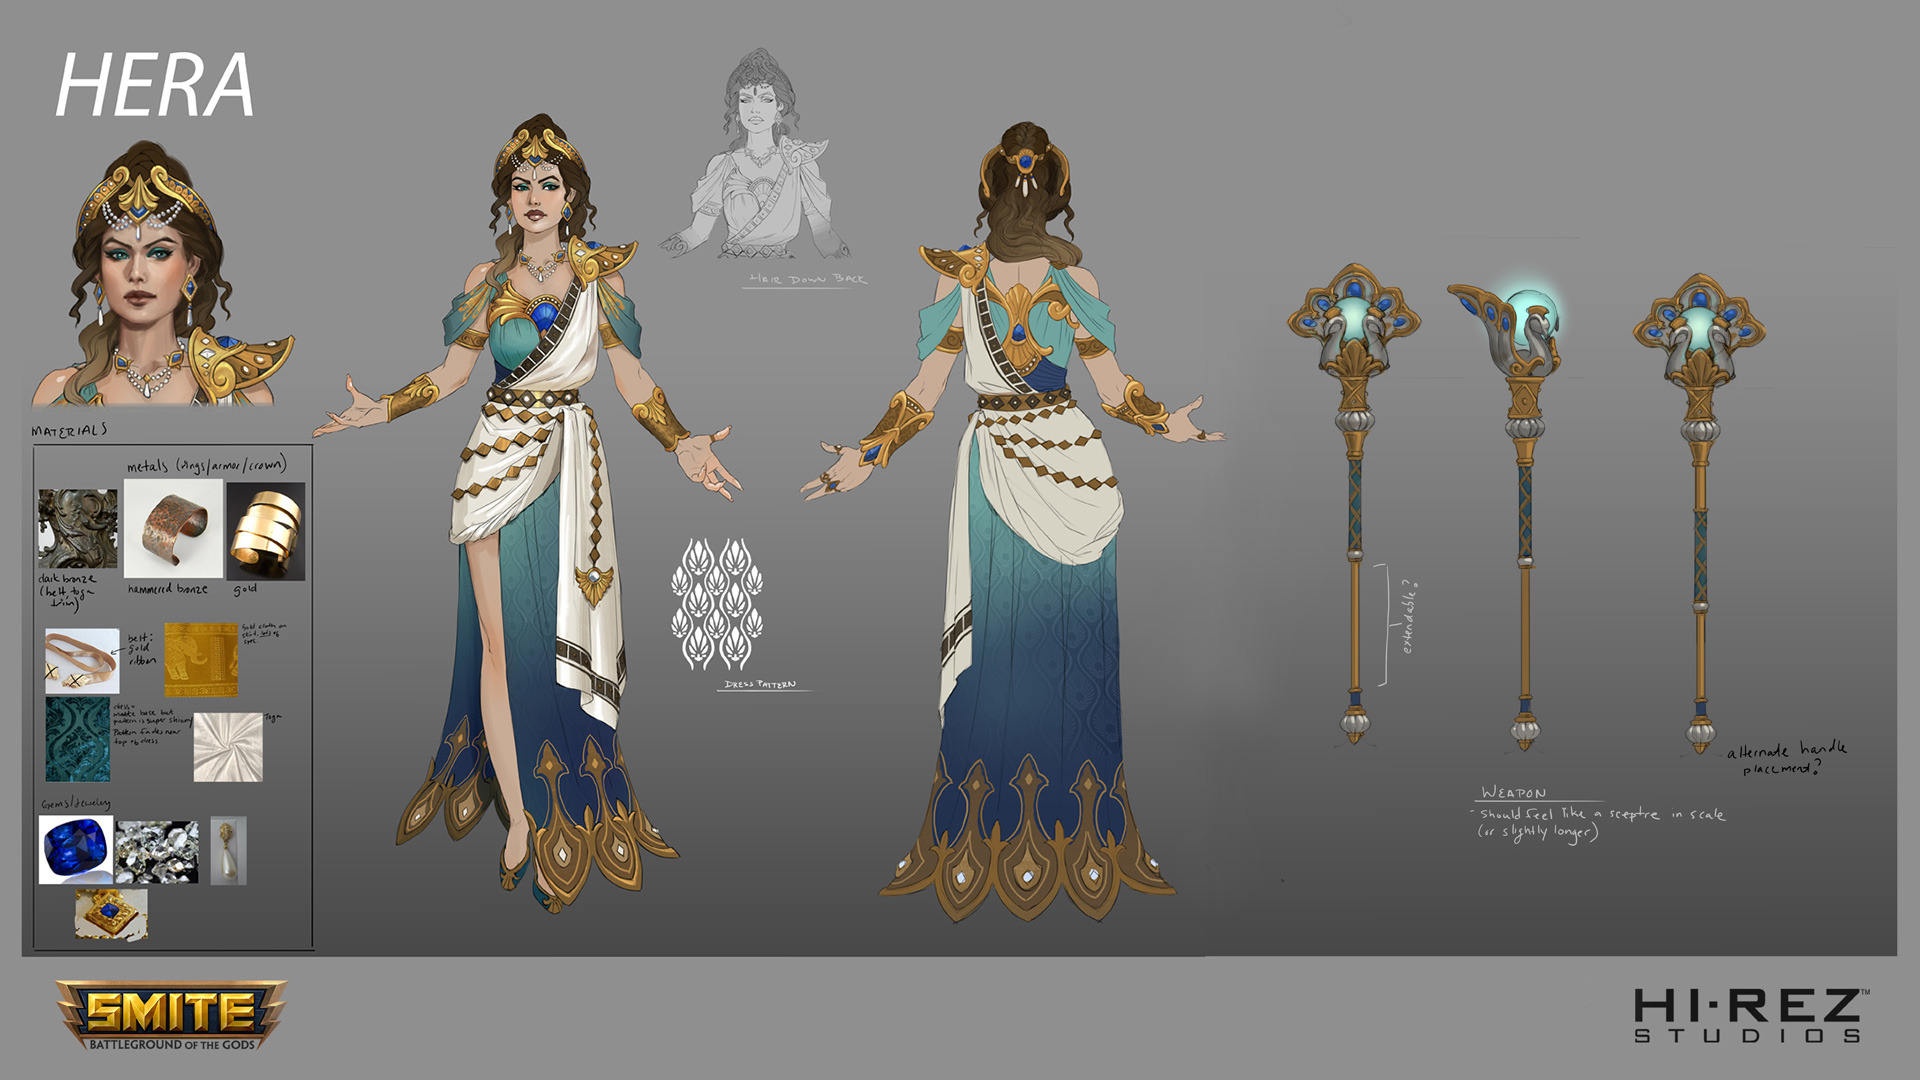 Hera, Queen of the Gods, Makes Her Royal Entrance to Smite